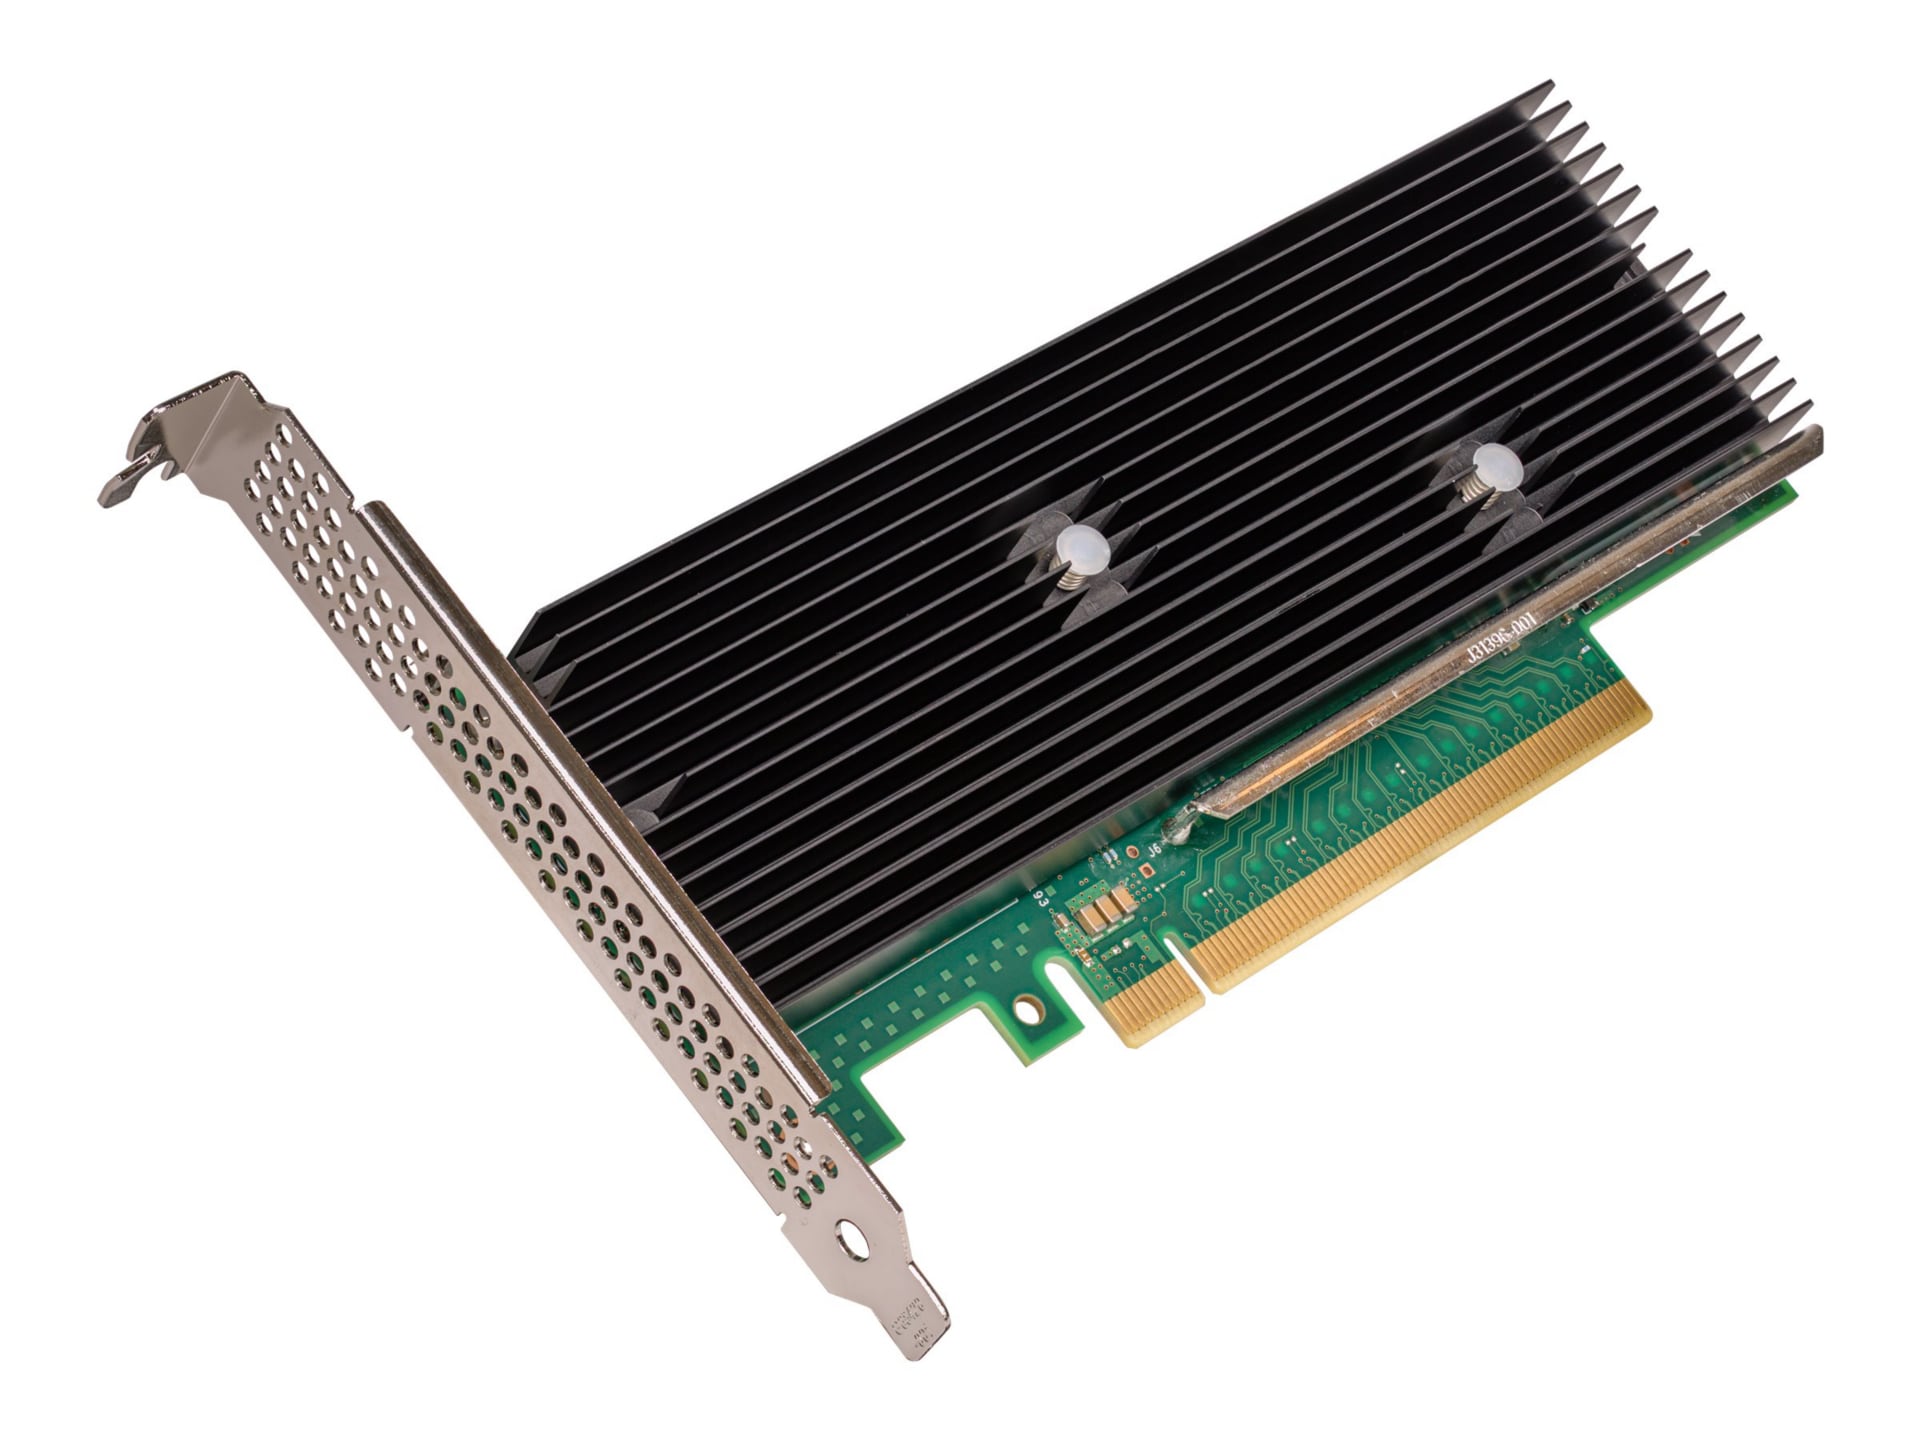 Intel QuickAssist Adapter 8970 - cryptographic accelerator - PCIe 3.0 x16